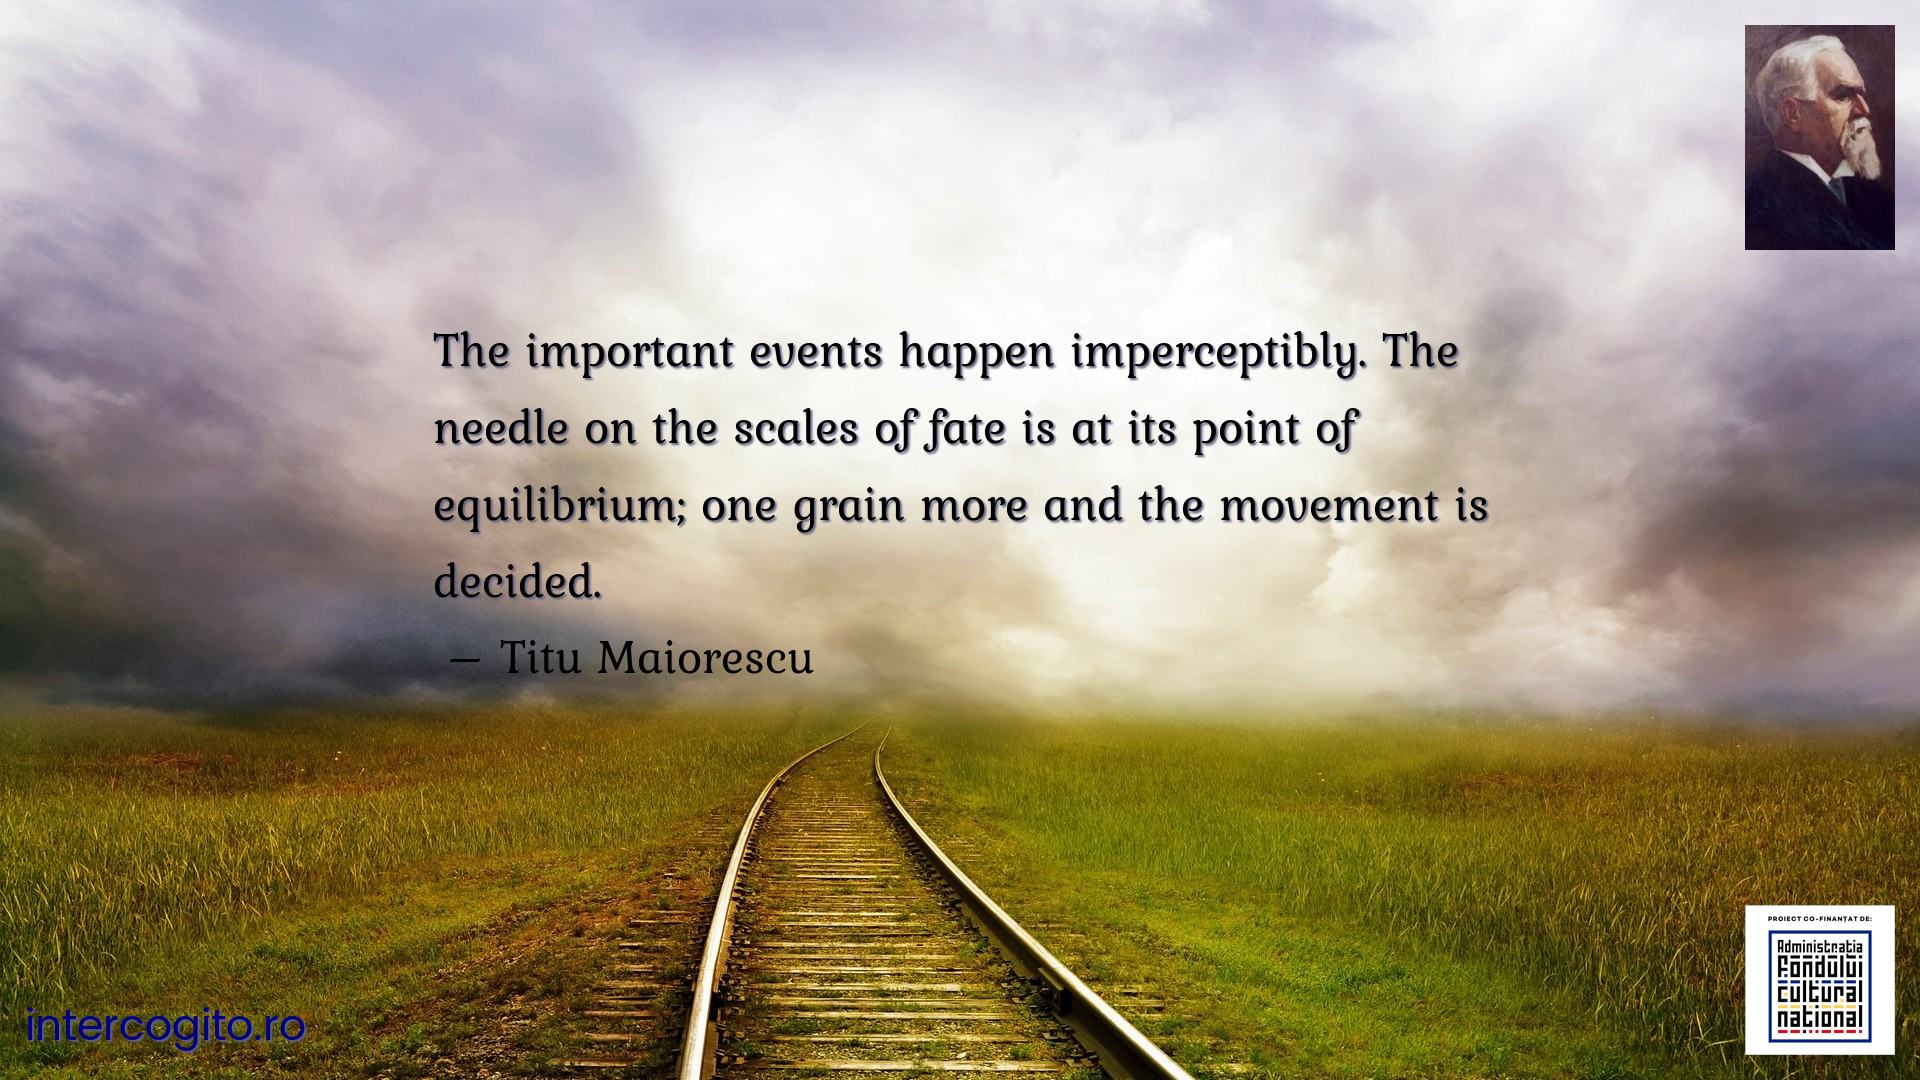 The important events happen imperceptibly. The needle on the scales of fate is at its point of equilibrium; one grain more and the movement is decided.